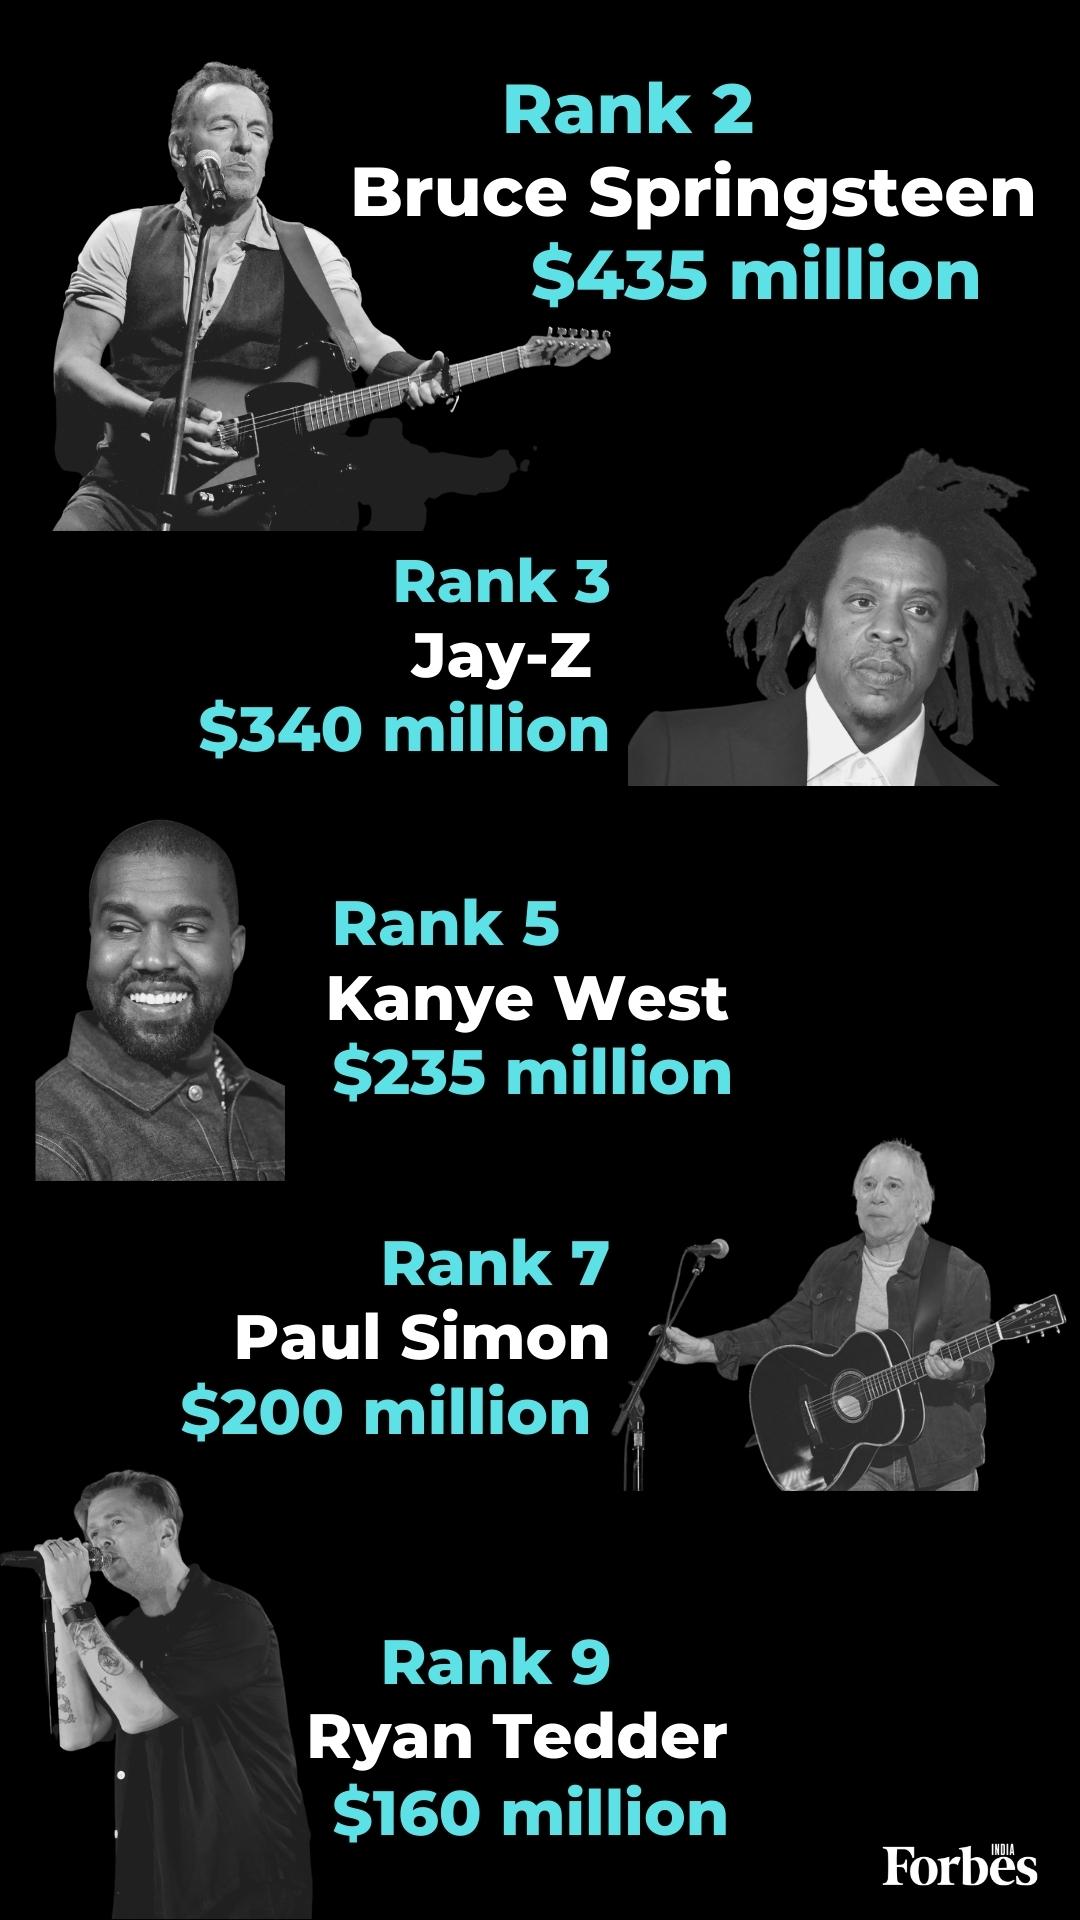 Taylor Swift, Jay-Z, Kanye West, Bruce Springsteen, and more—musicians rule Forbes' list of highest-paid entertainers of 2022